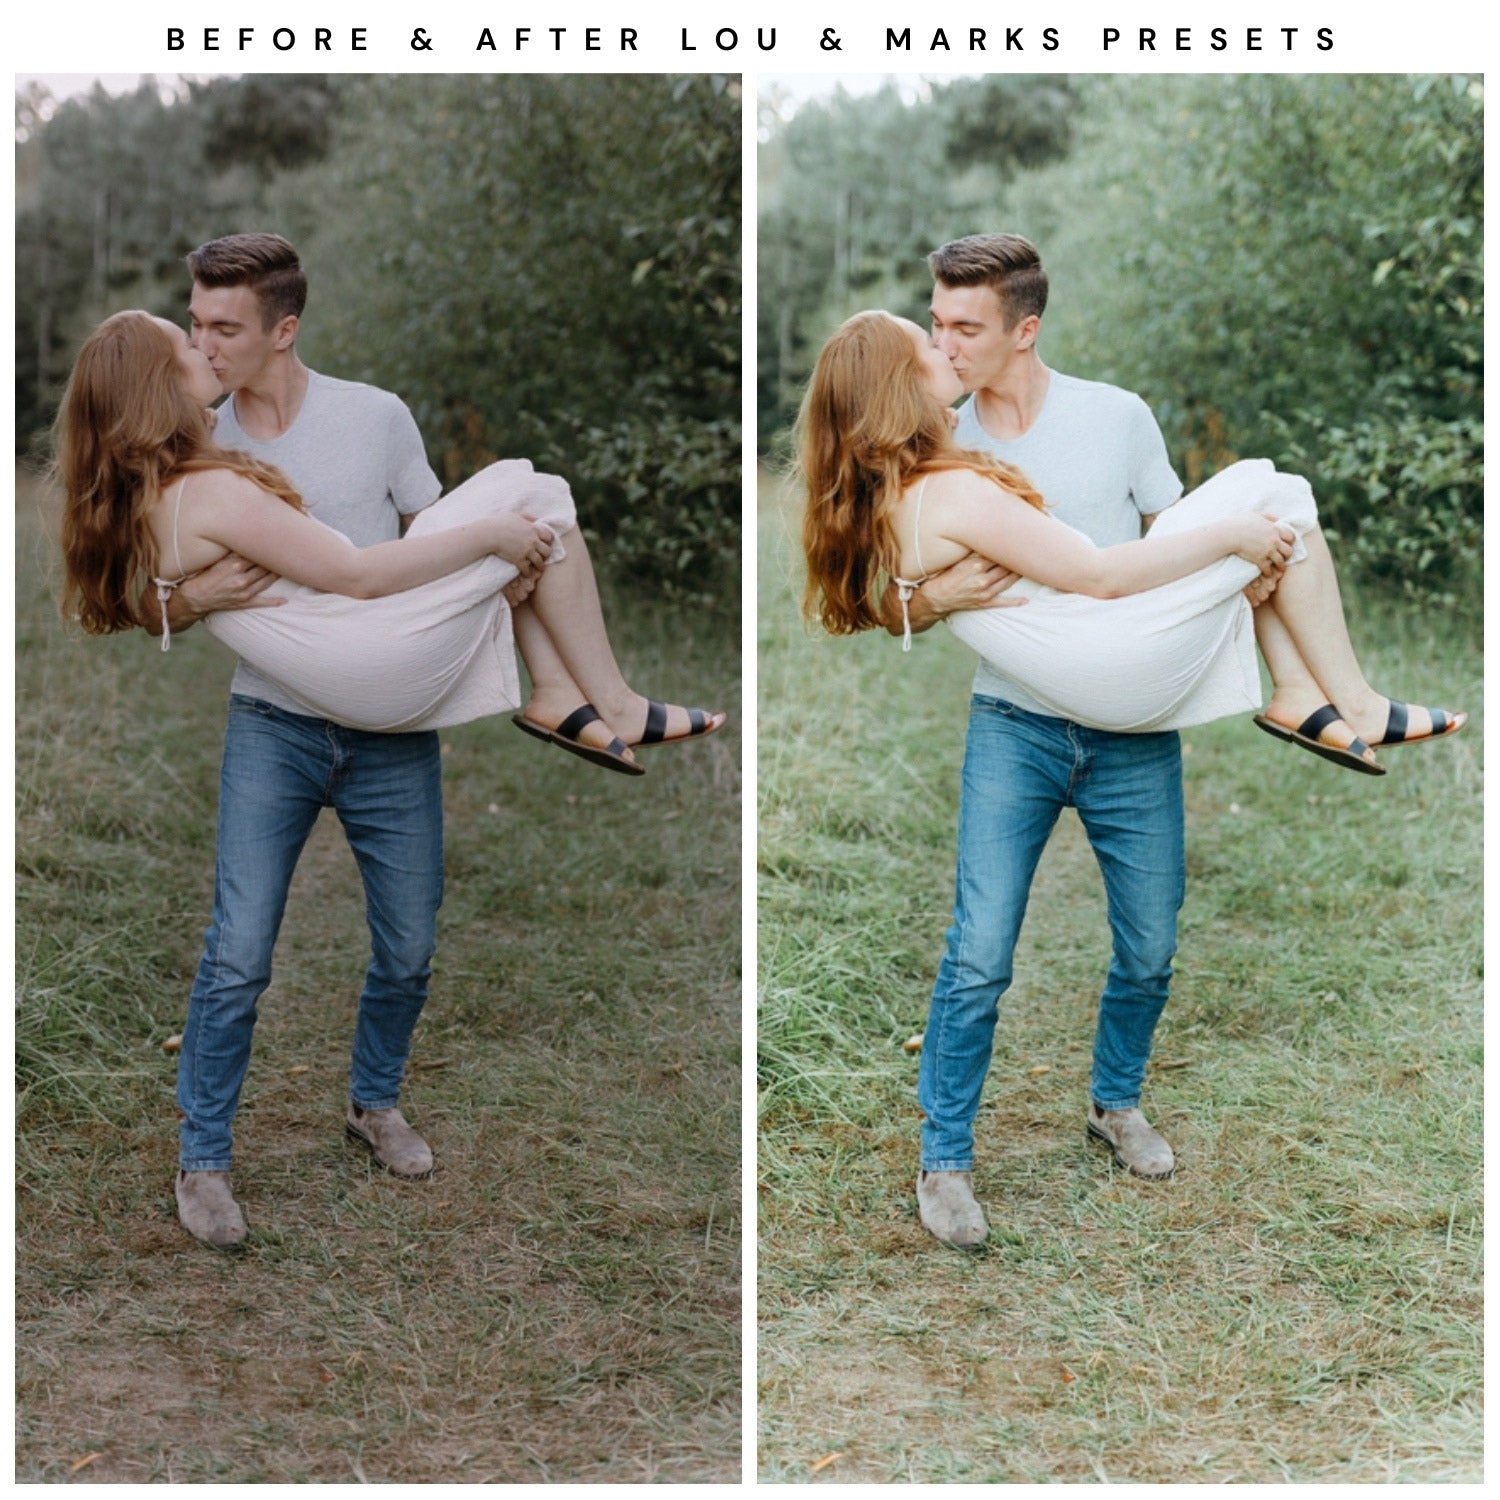 Lou & Marks Presets Light And Airy Lightroom Presets Bundle The Best Presets Couple Session